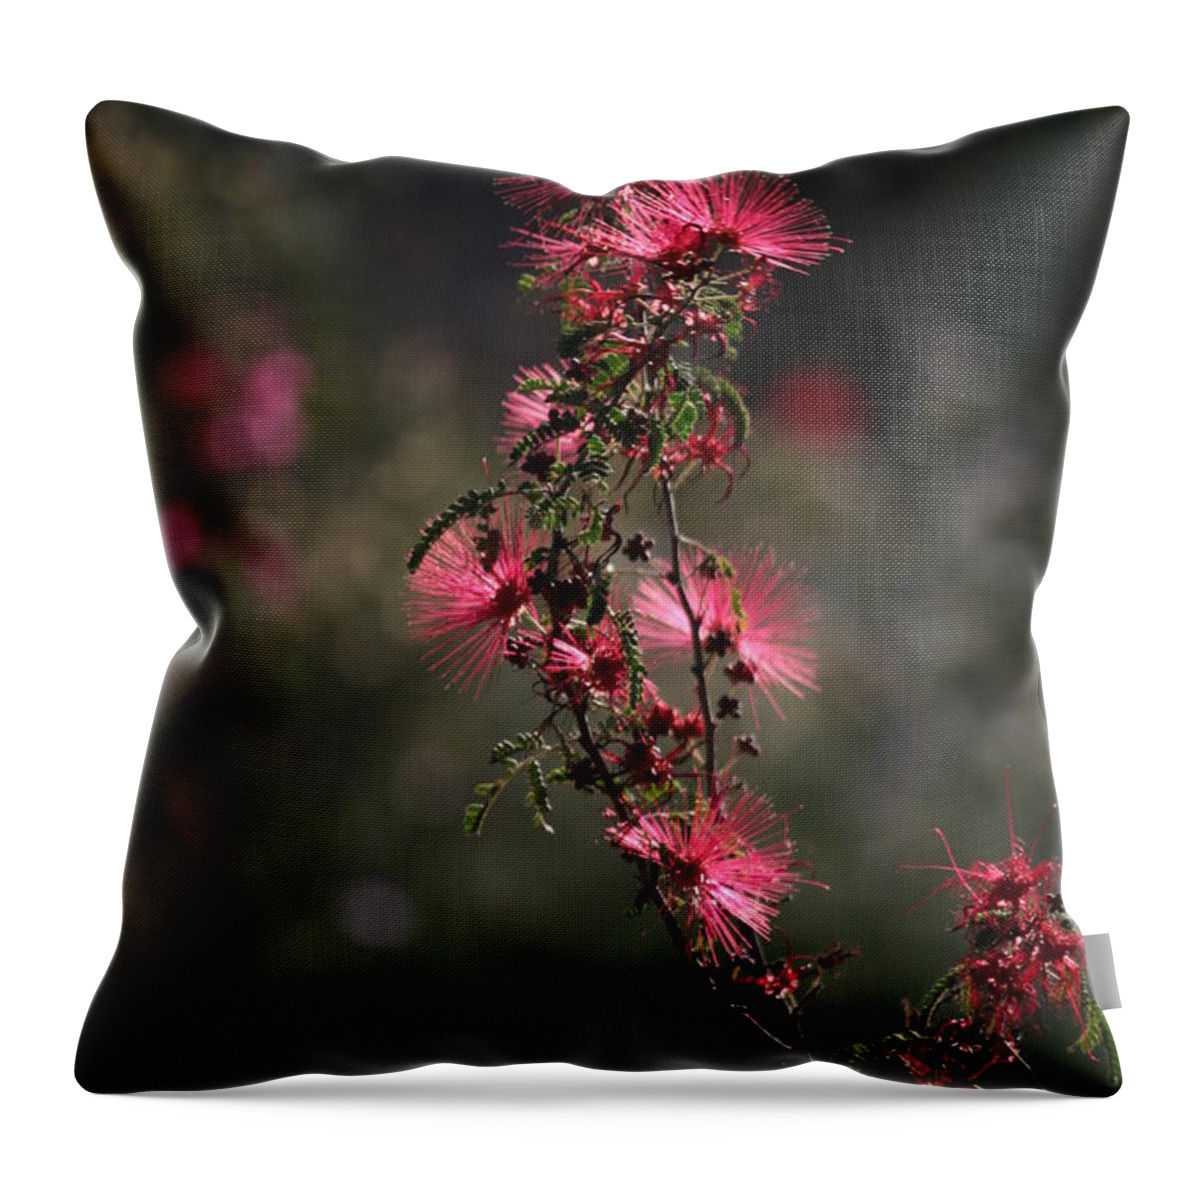 Red Flower Throw Pillow featuring the photograph Baja Fairy Duster 2 by Grant Washburn